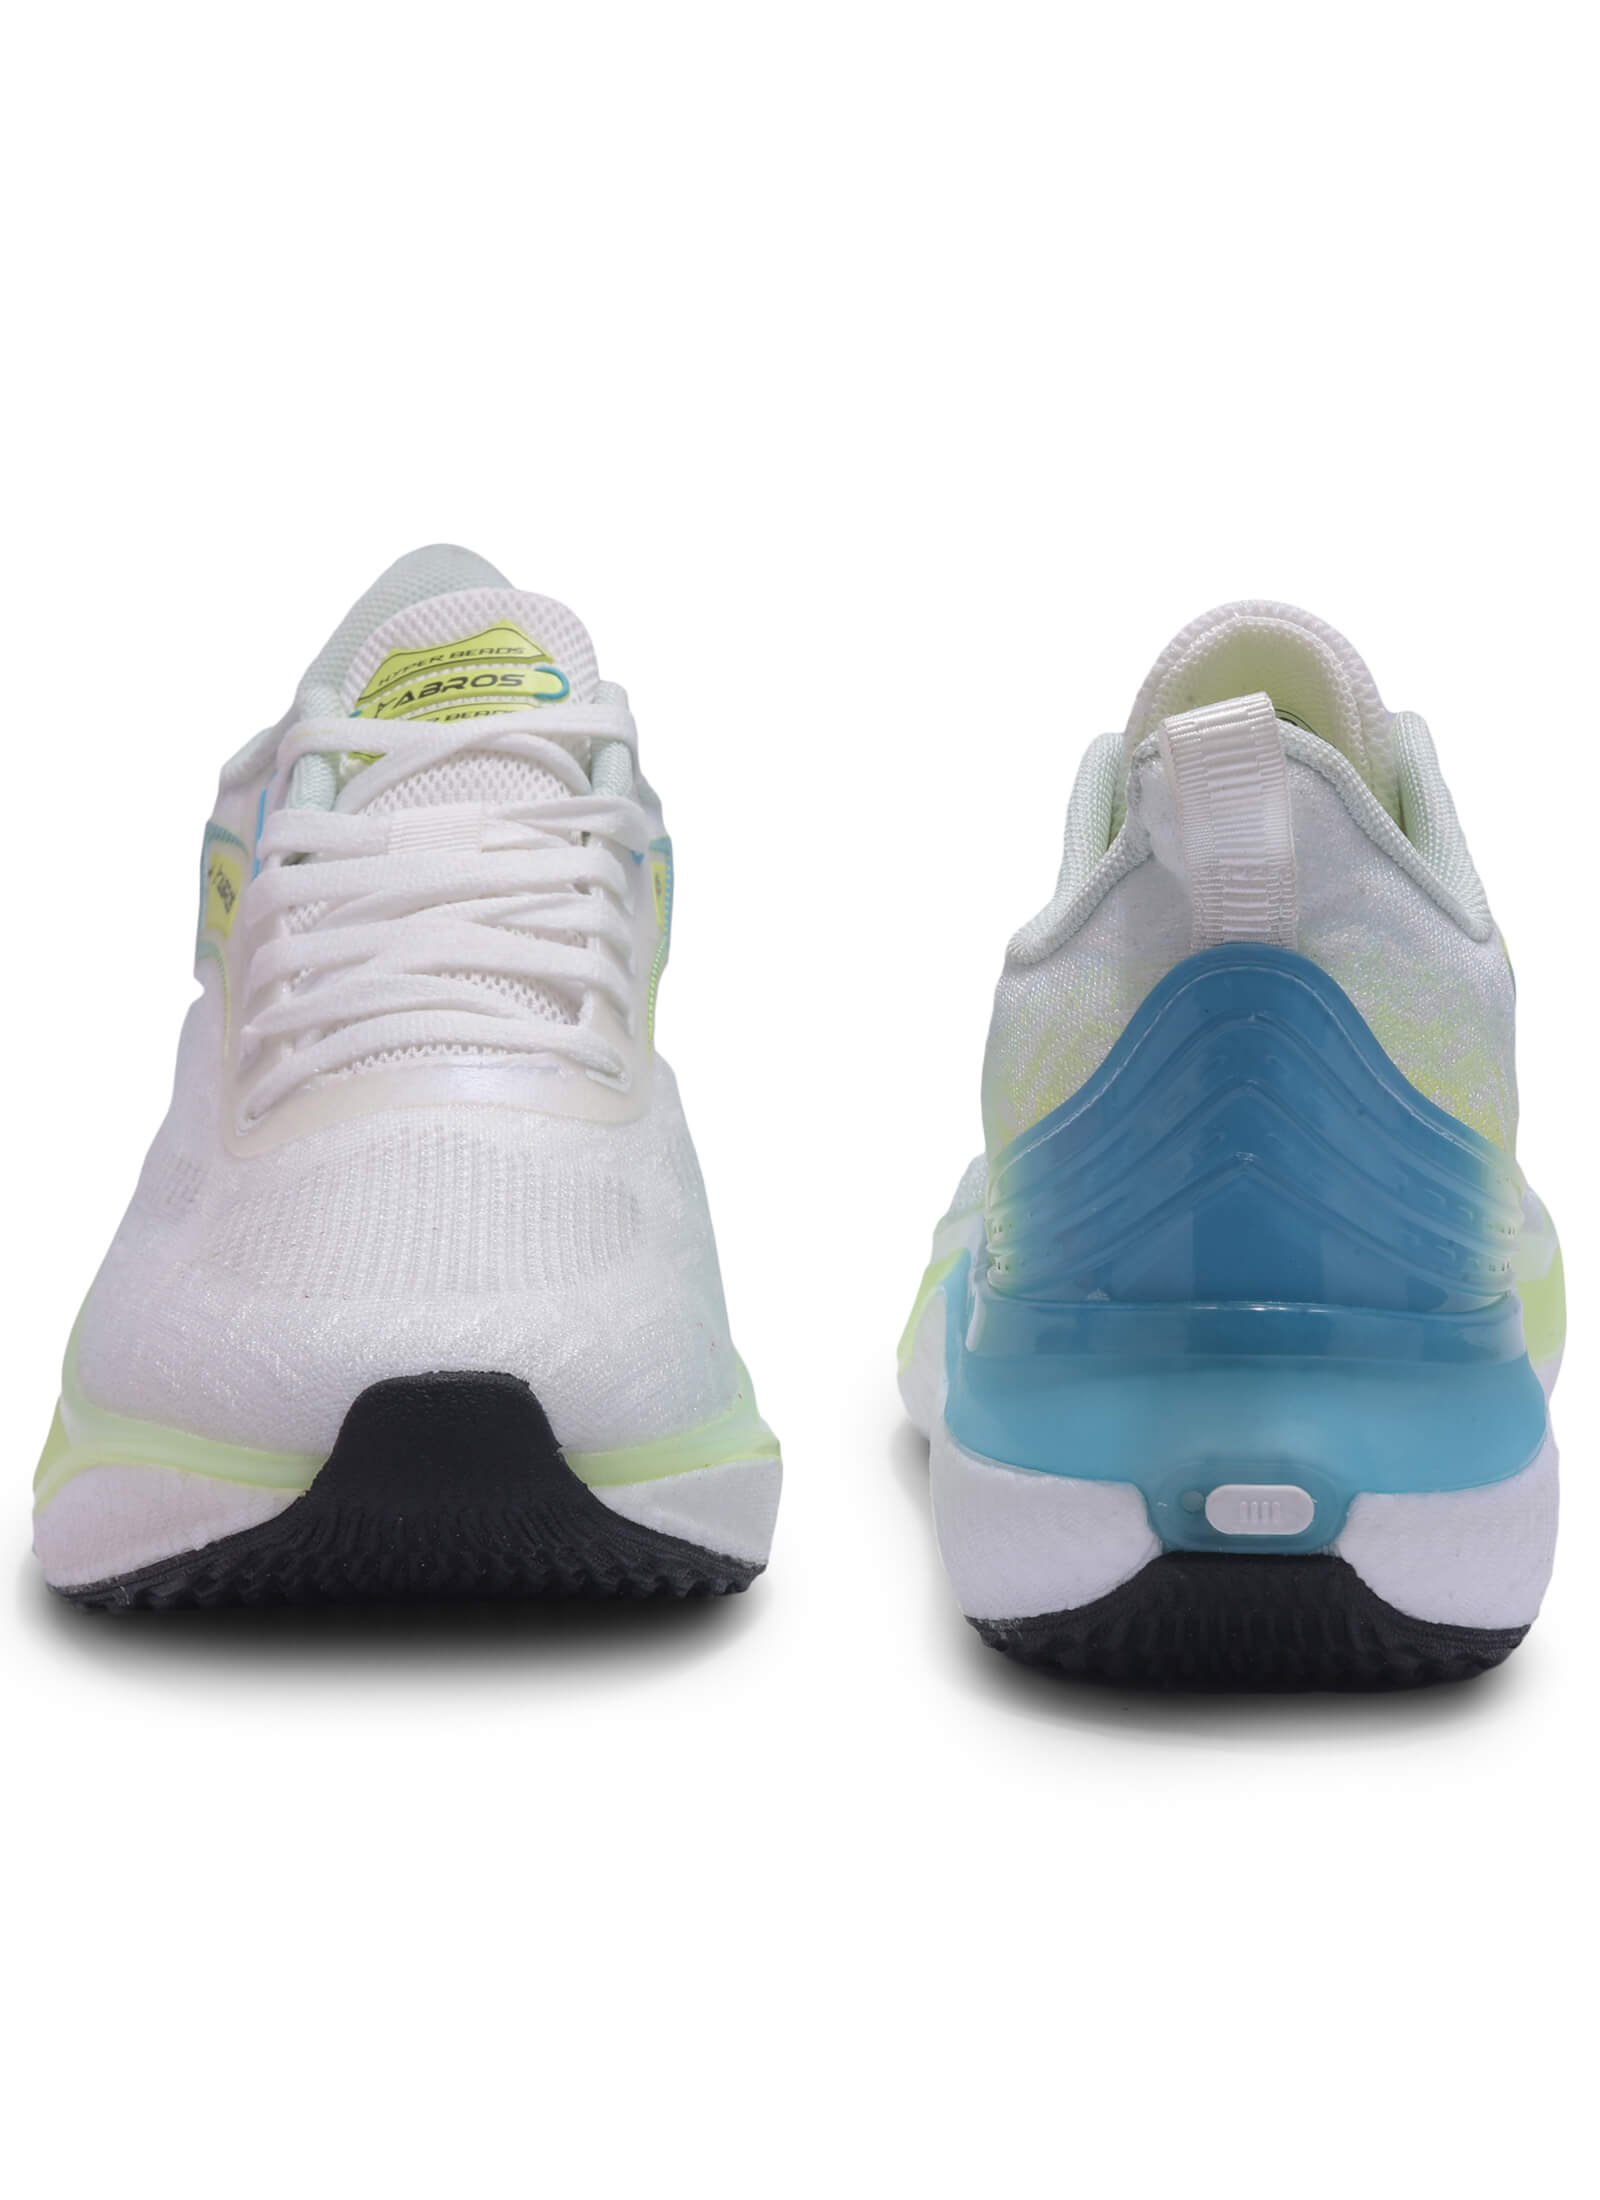 Future Hyper Beads Sports Shoes for Men